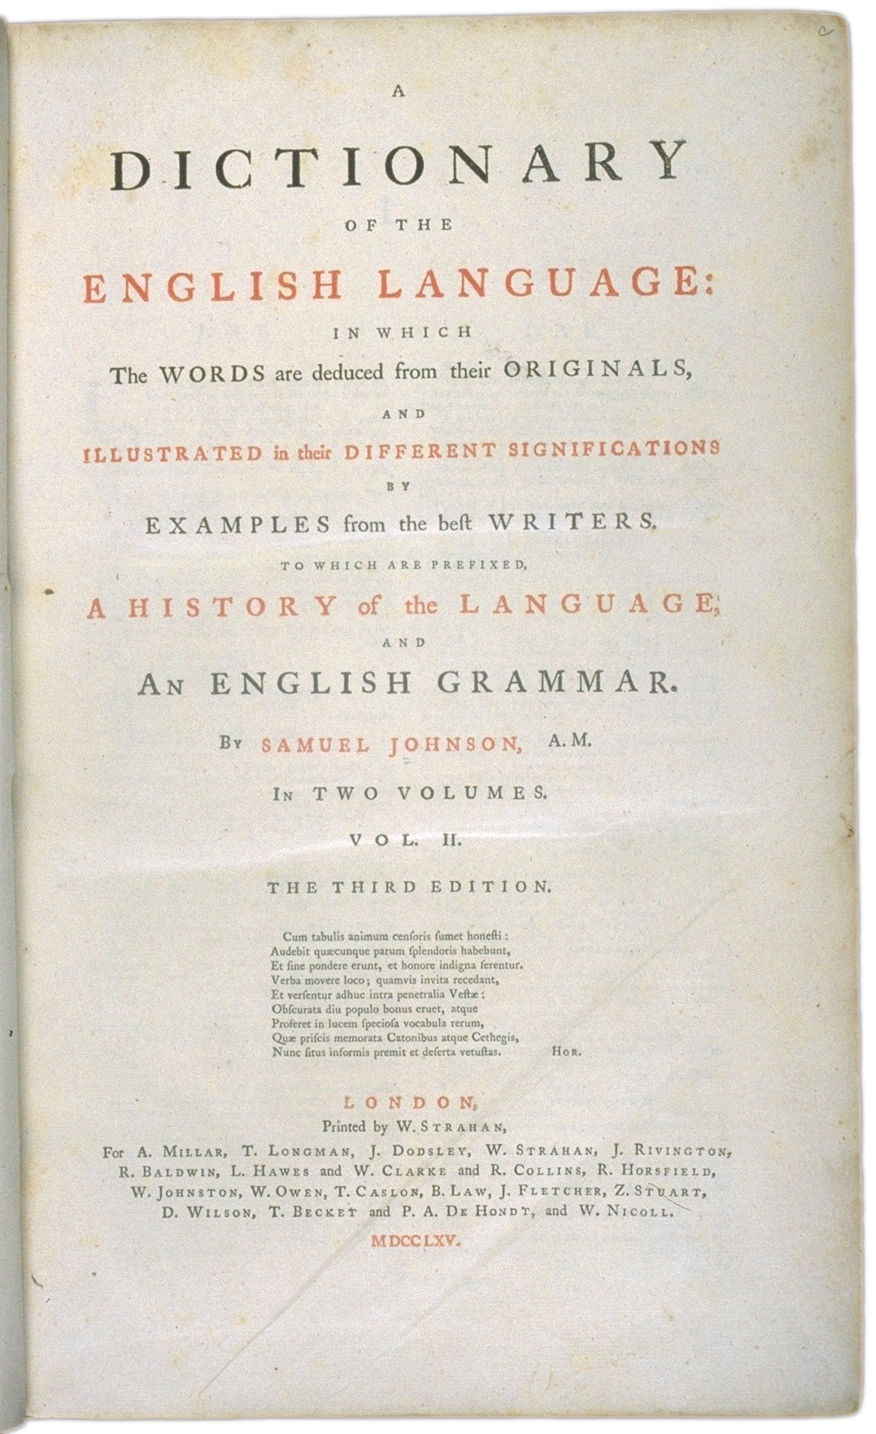 A Dictionary of the English Language Title page. Choose 'View Text' (at top) for faster download.